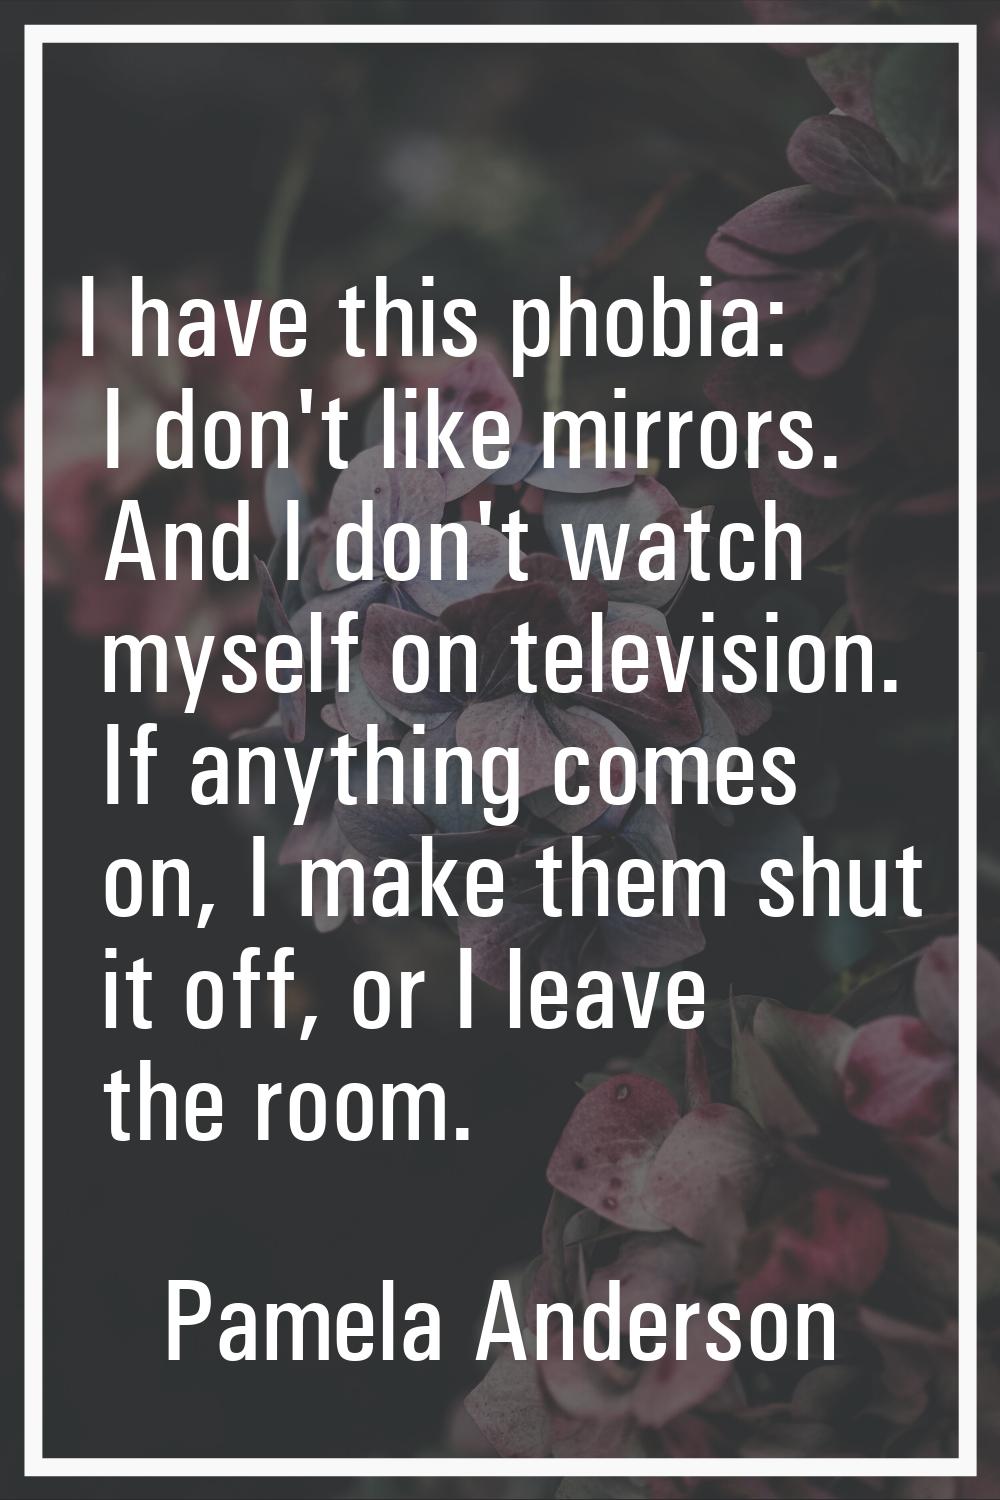 I have this phobia: I don't like mirrors. And I don't watch myself on television. If anything comes